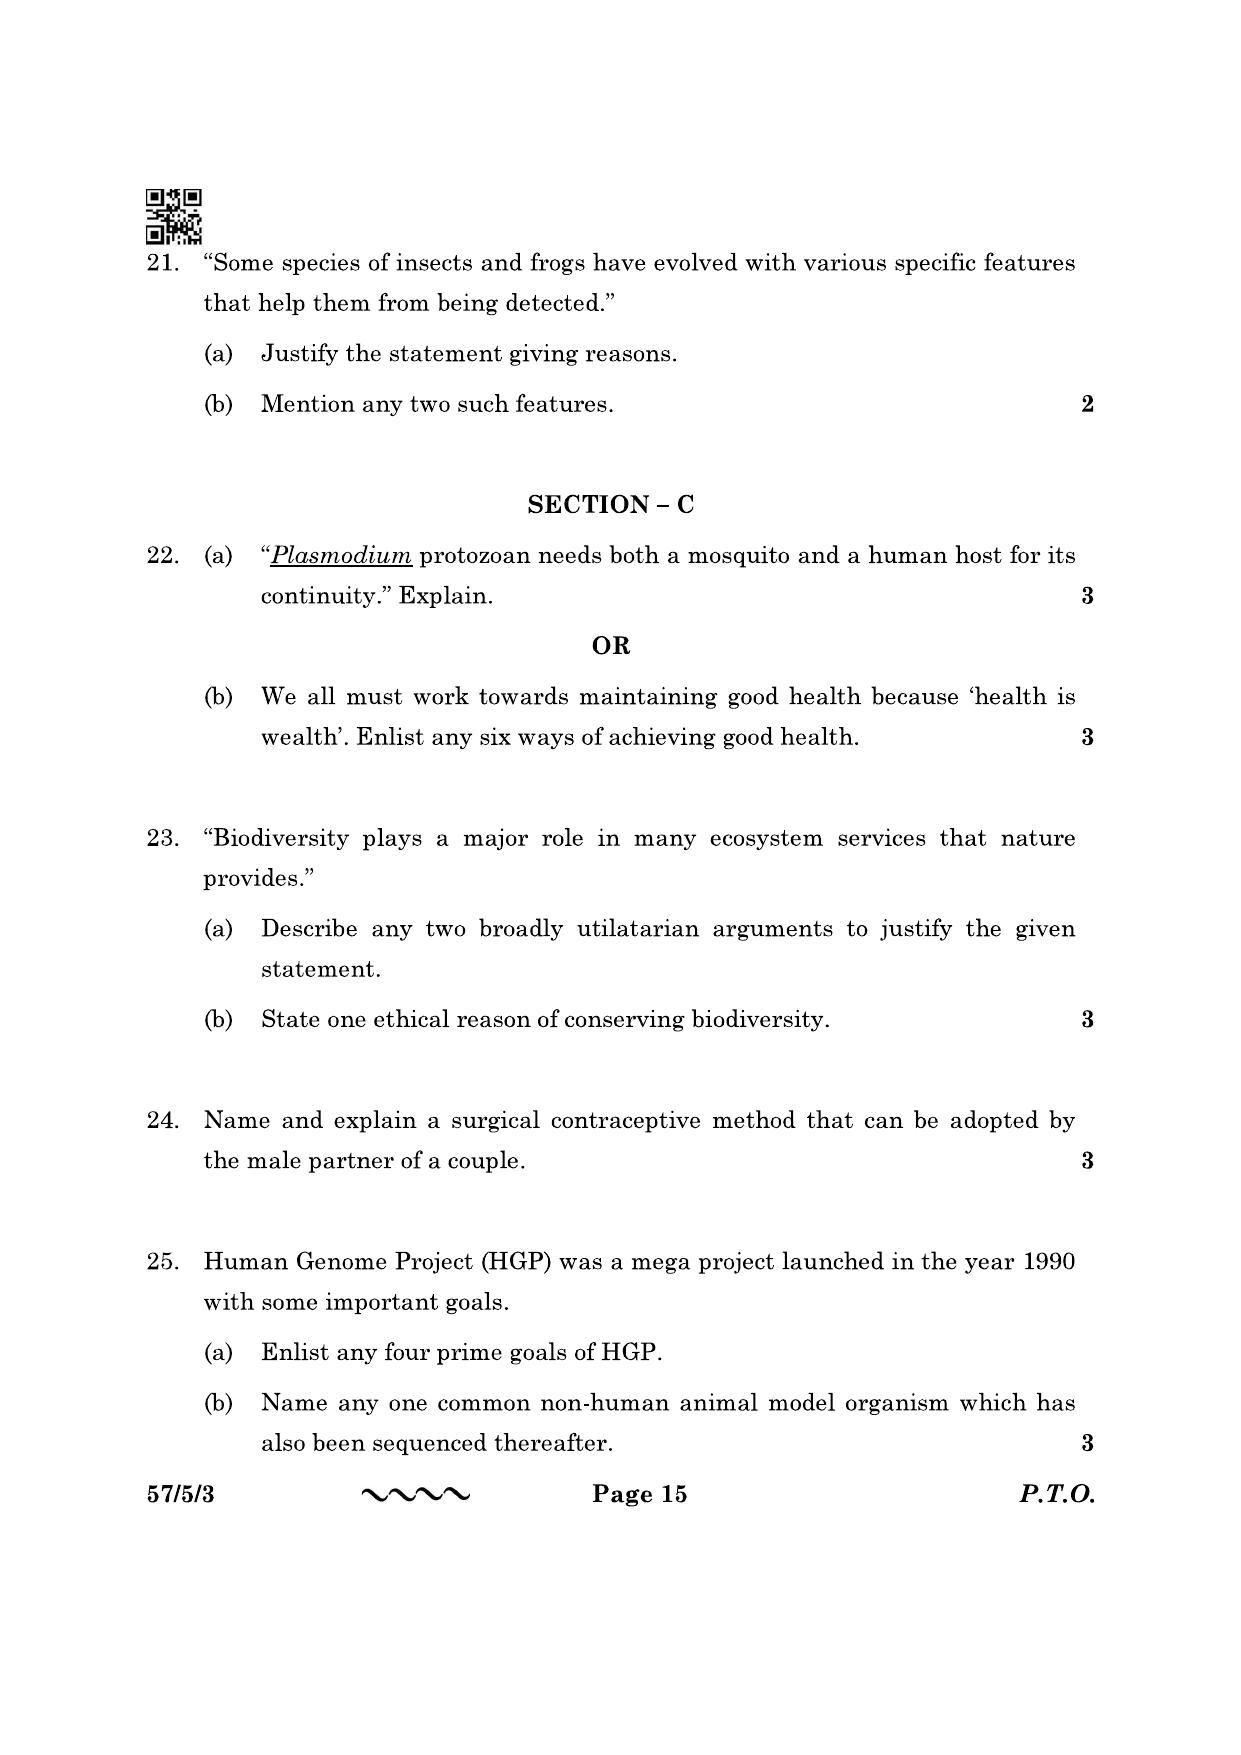 CBSE Class 12 57-5-3 Biology 2023 Question Paper - Page 15